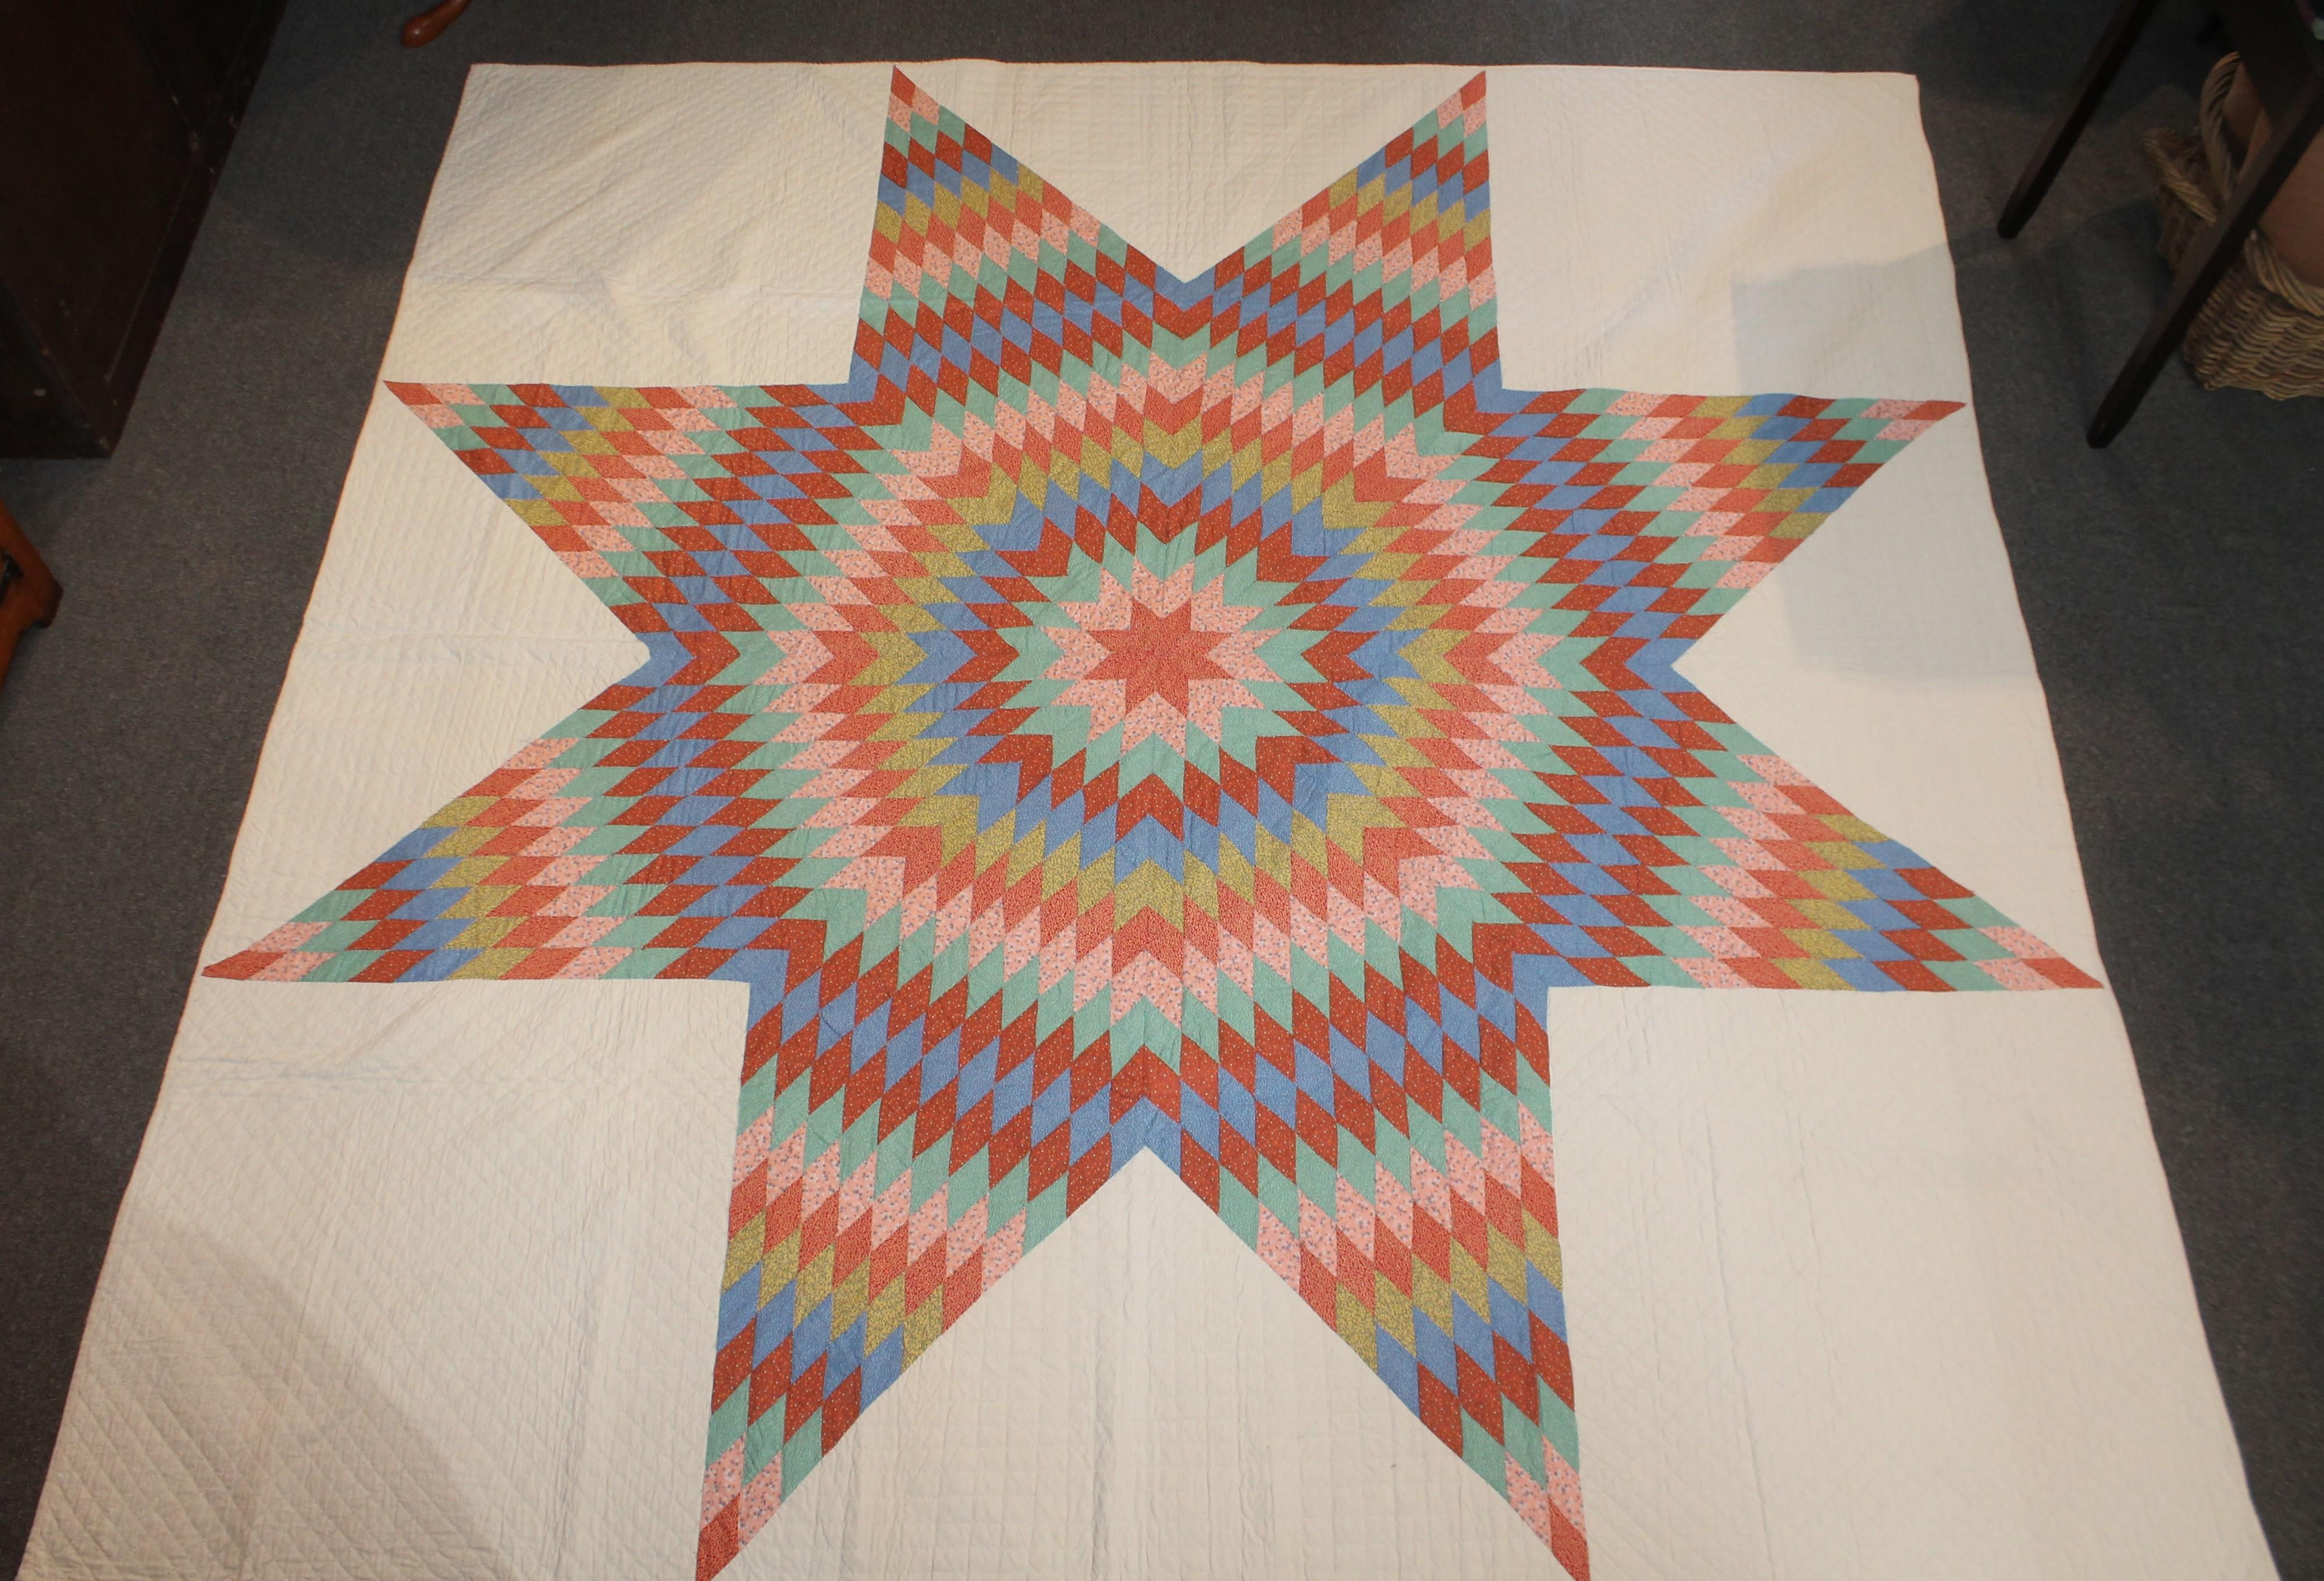 This fantastic early 20th century eight point star quilt is in pristine condition. It was found in Berks County, Pennsylvania and has amazing fall colors.